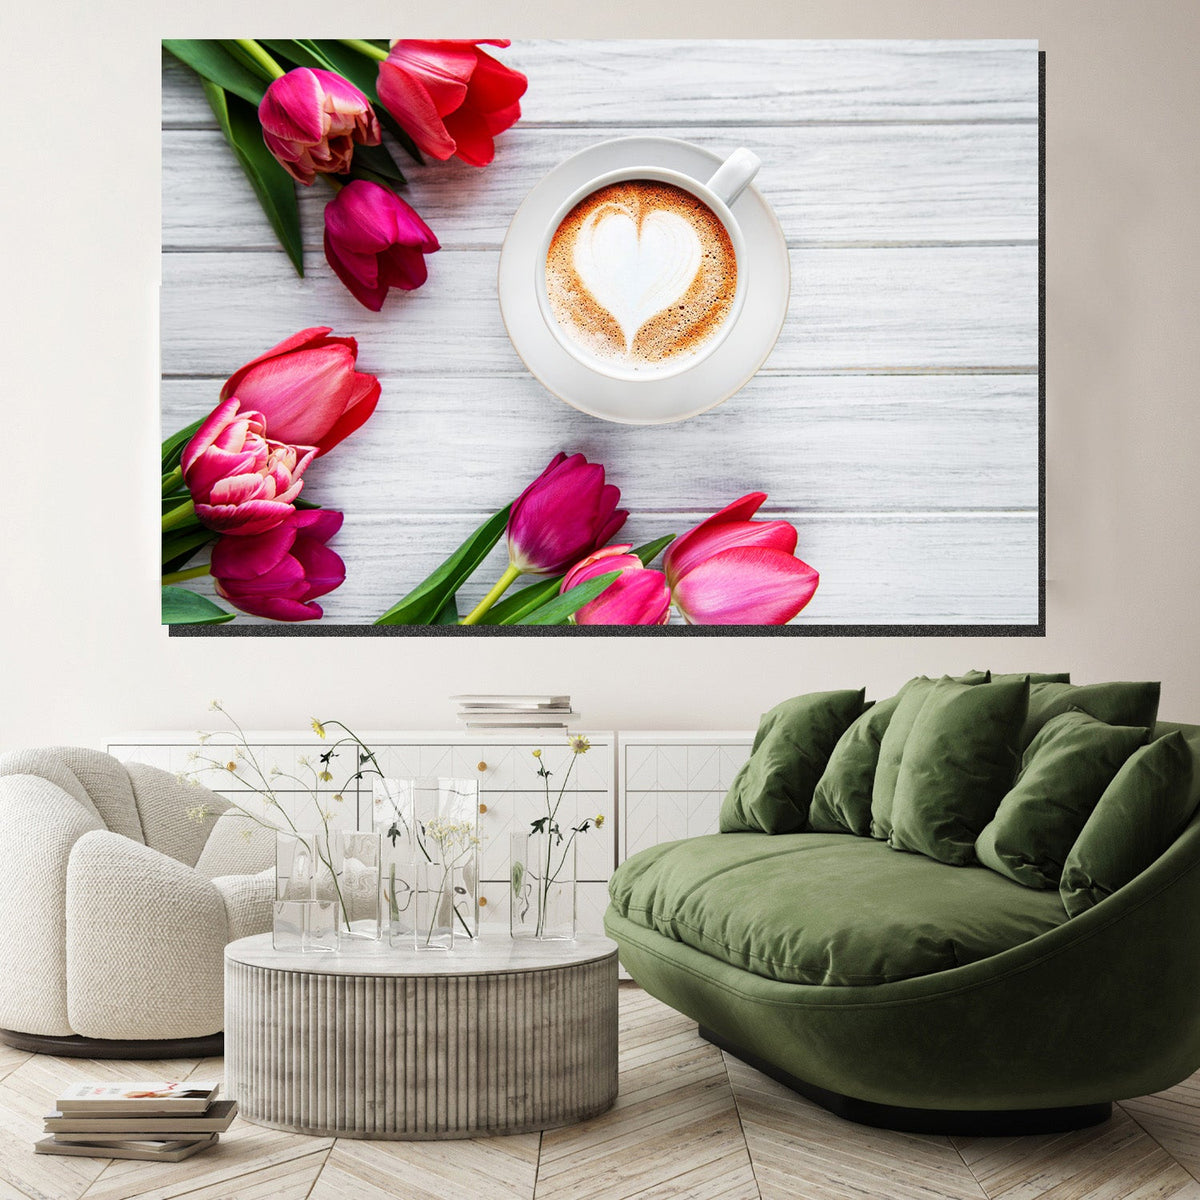 https://cdn.shopify.com/s/files/1/0387/9986/8044/products/CoffeeandTulipsCanvasArtprintStretched-2.jpg